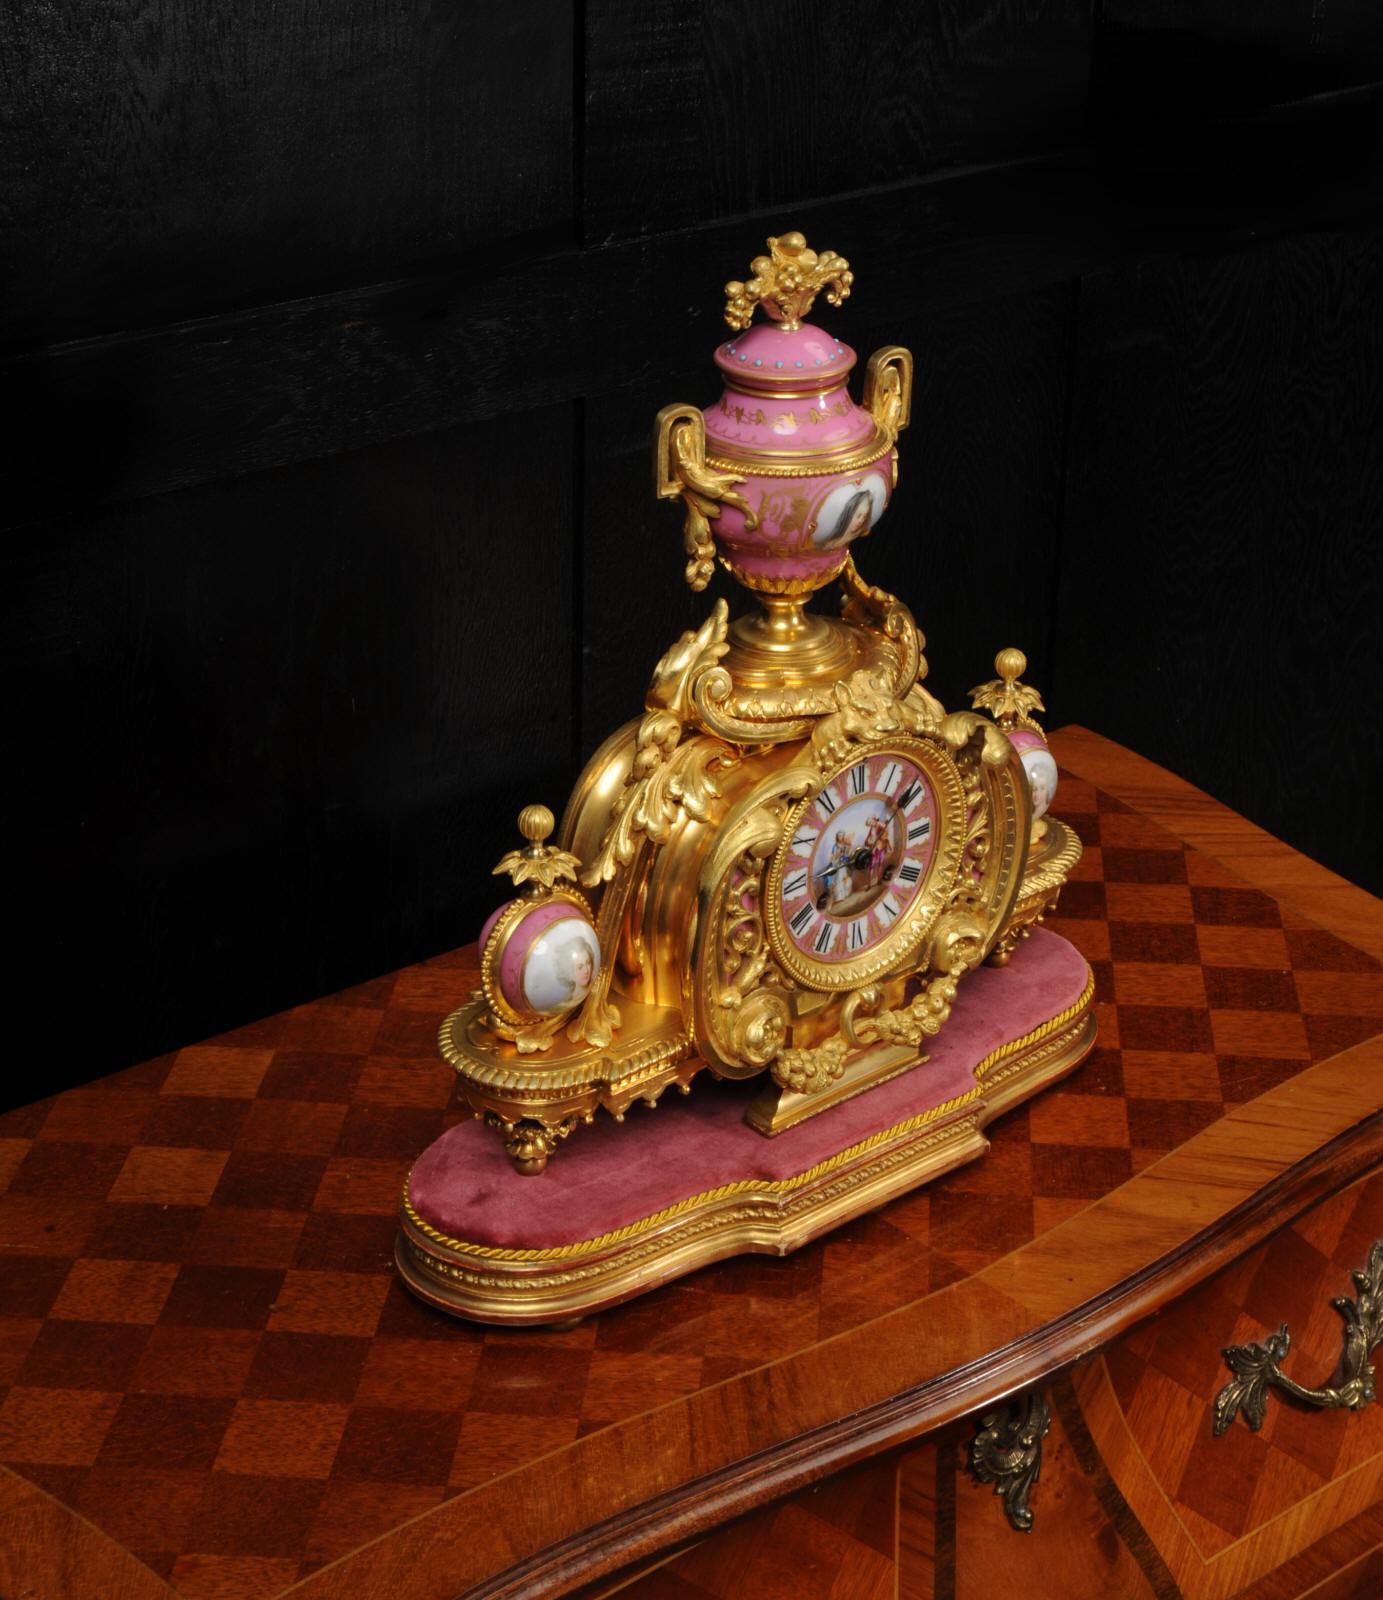 19th Century Ormolu and Sevres Porcelain Antique French Clock by Achille Brocot For Sale